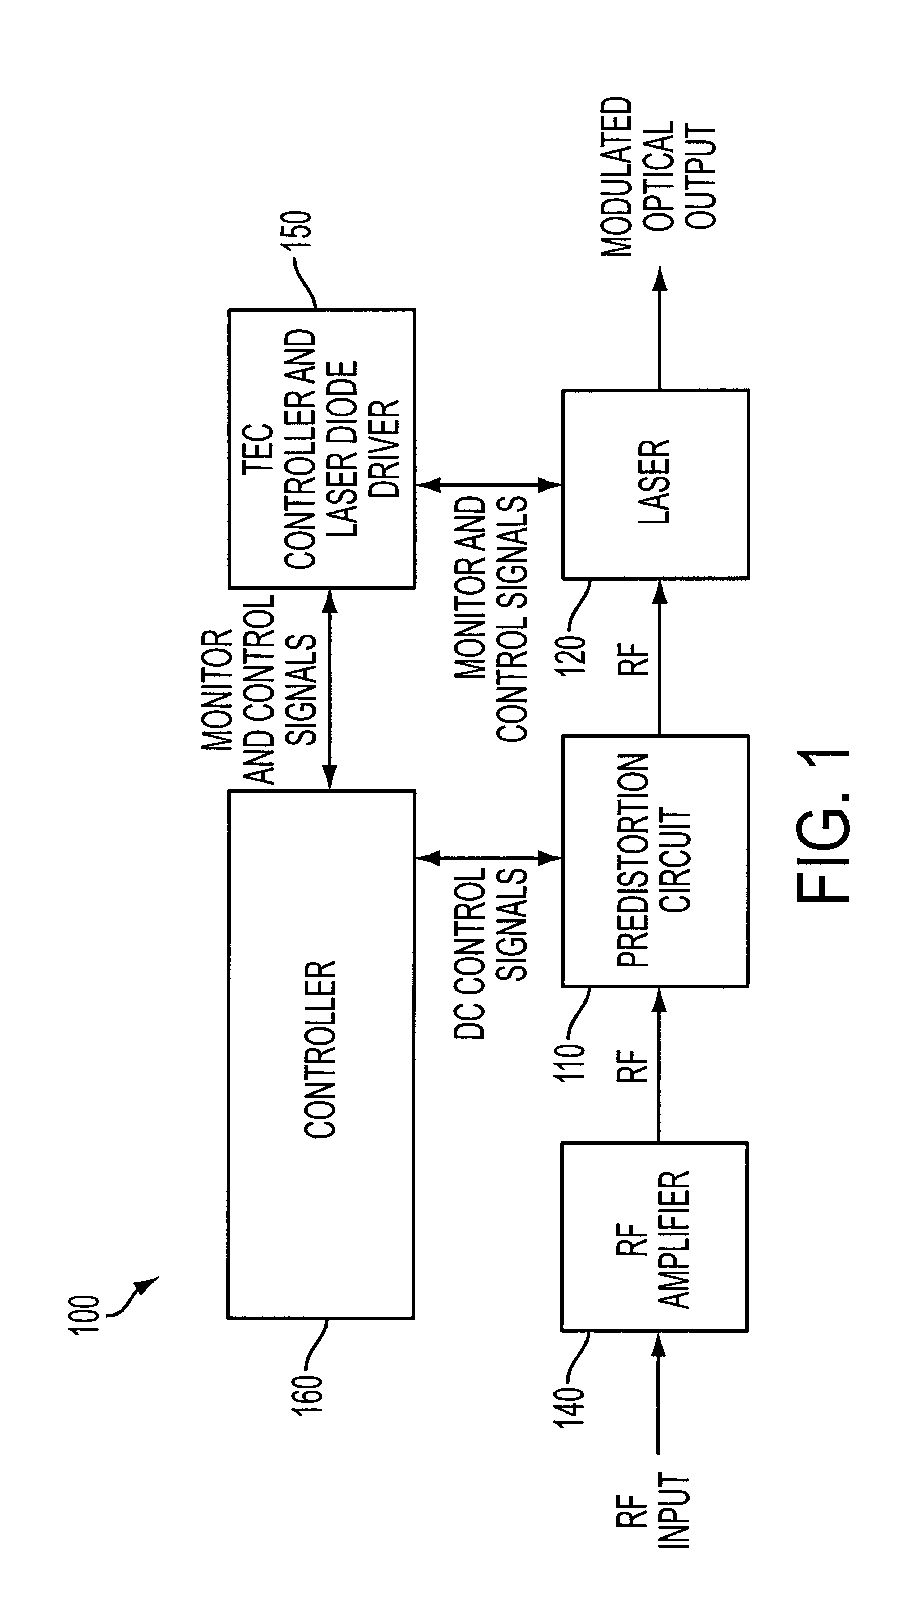 Predistortion circuit including distortion generator diodes with adjustable diode bias